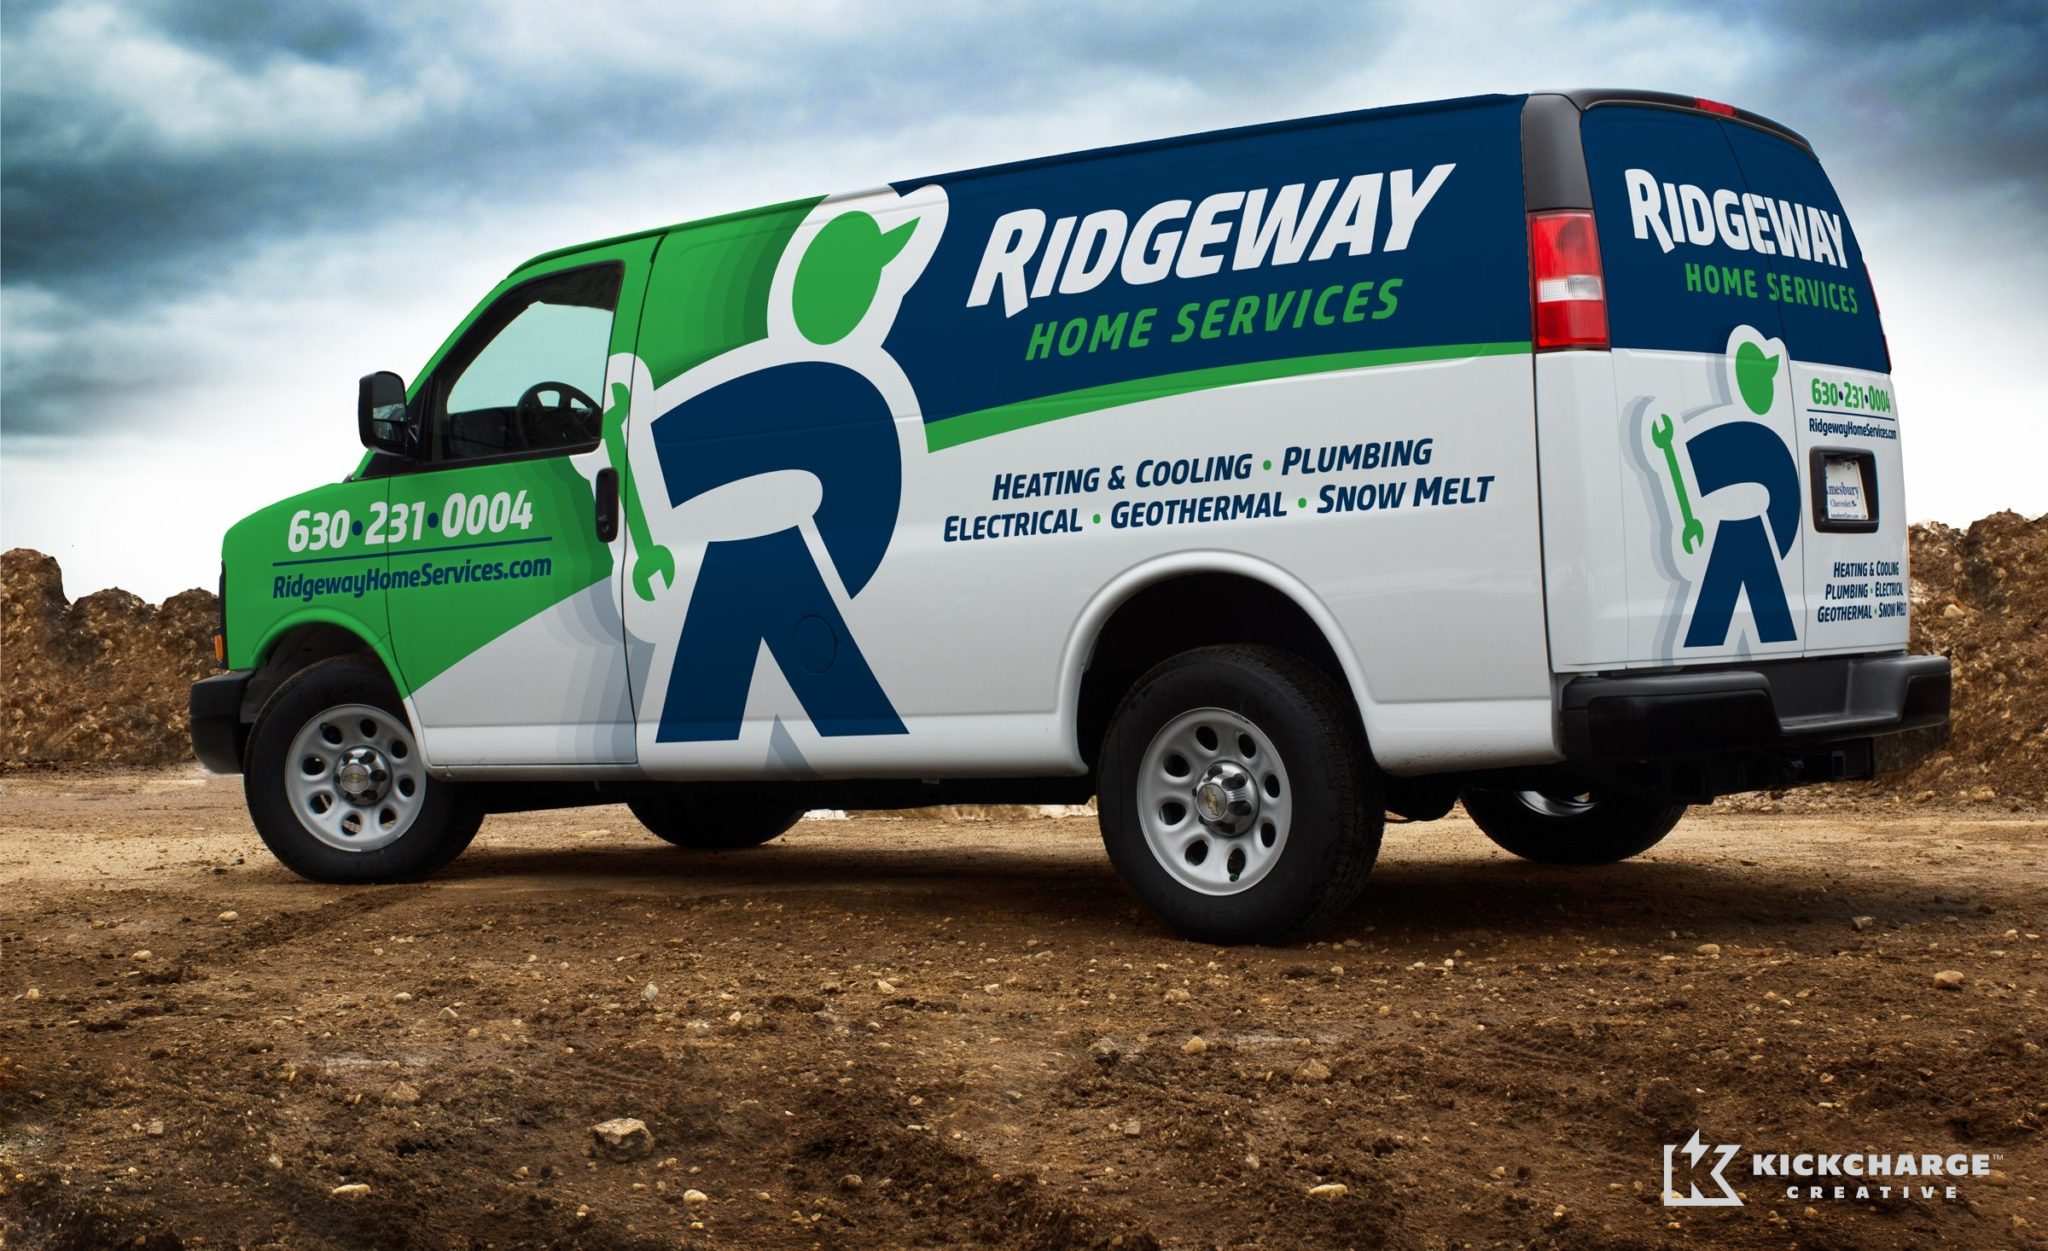 Vehicle wrap design for Ridgeway Home Services located in IL. The best vehicle wraps use simple, eye-catching graphics that are easy to read, as this wrap for Ridgeway shows.